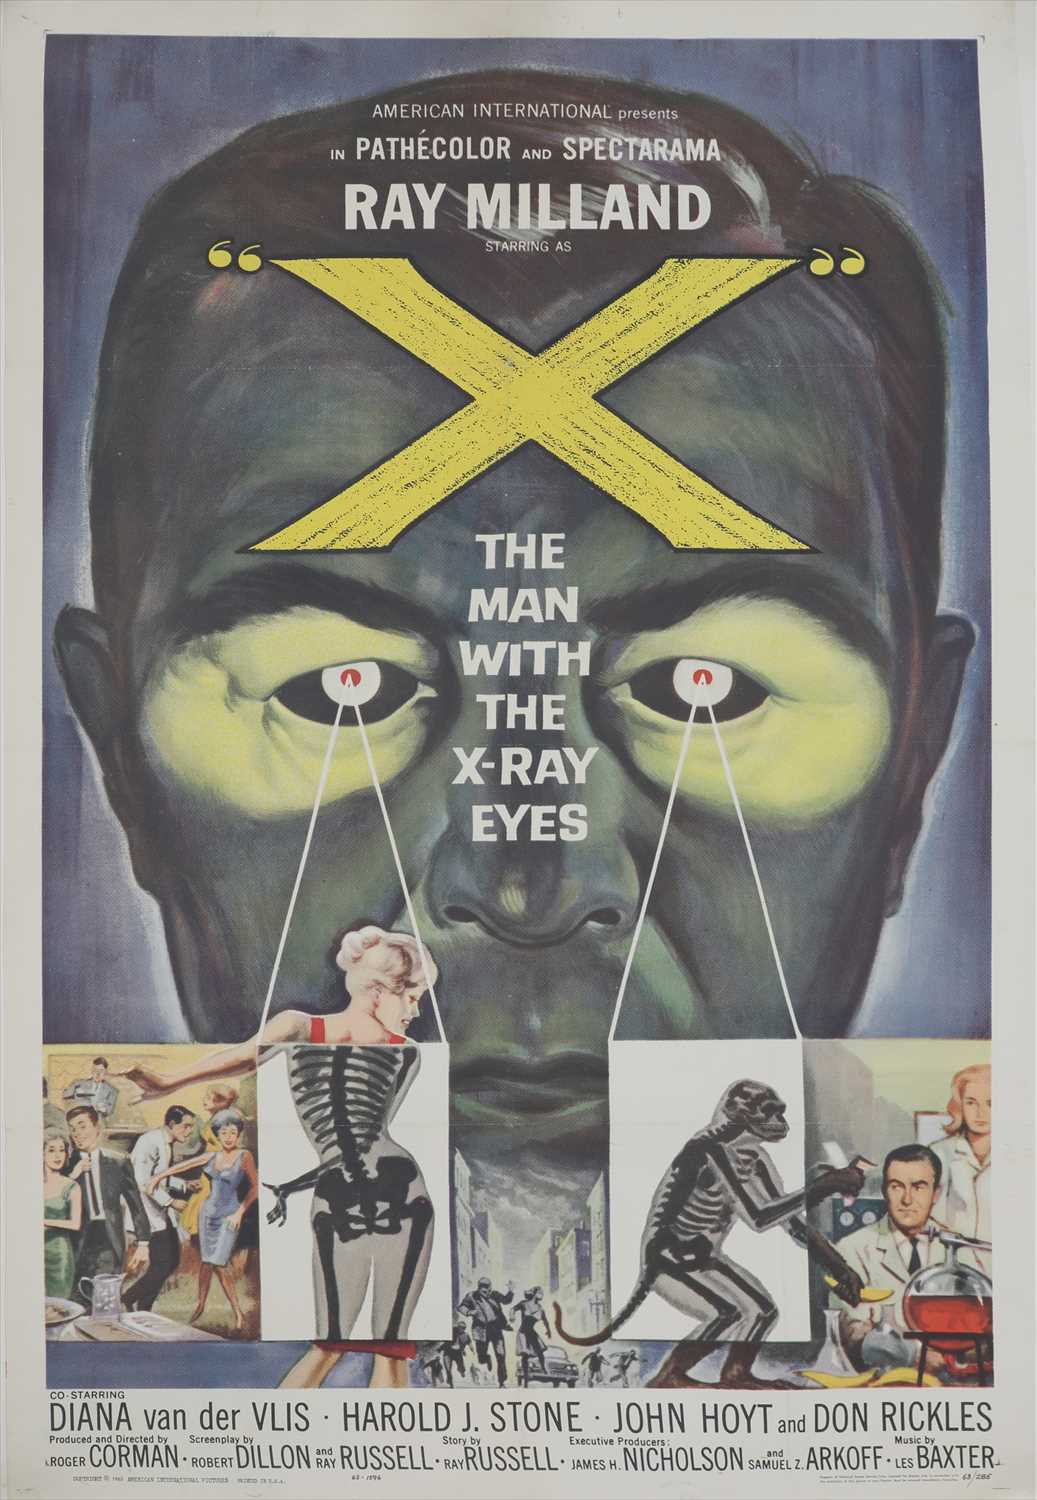 Lot 65 - 'THE MAN WITH THE X-RAY EYES'